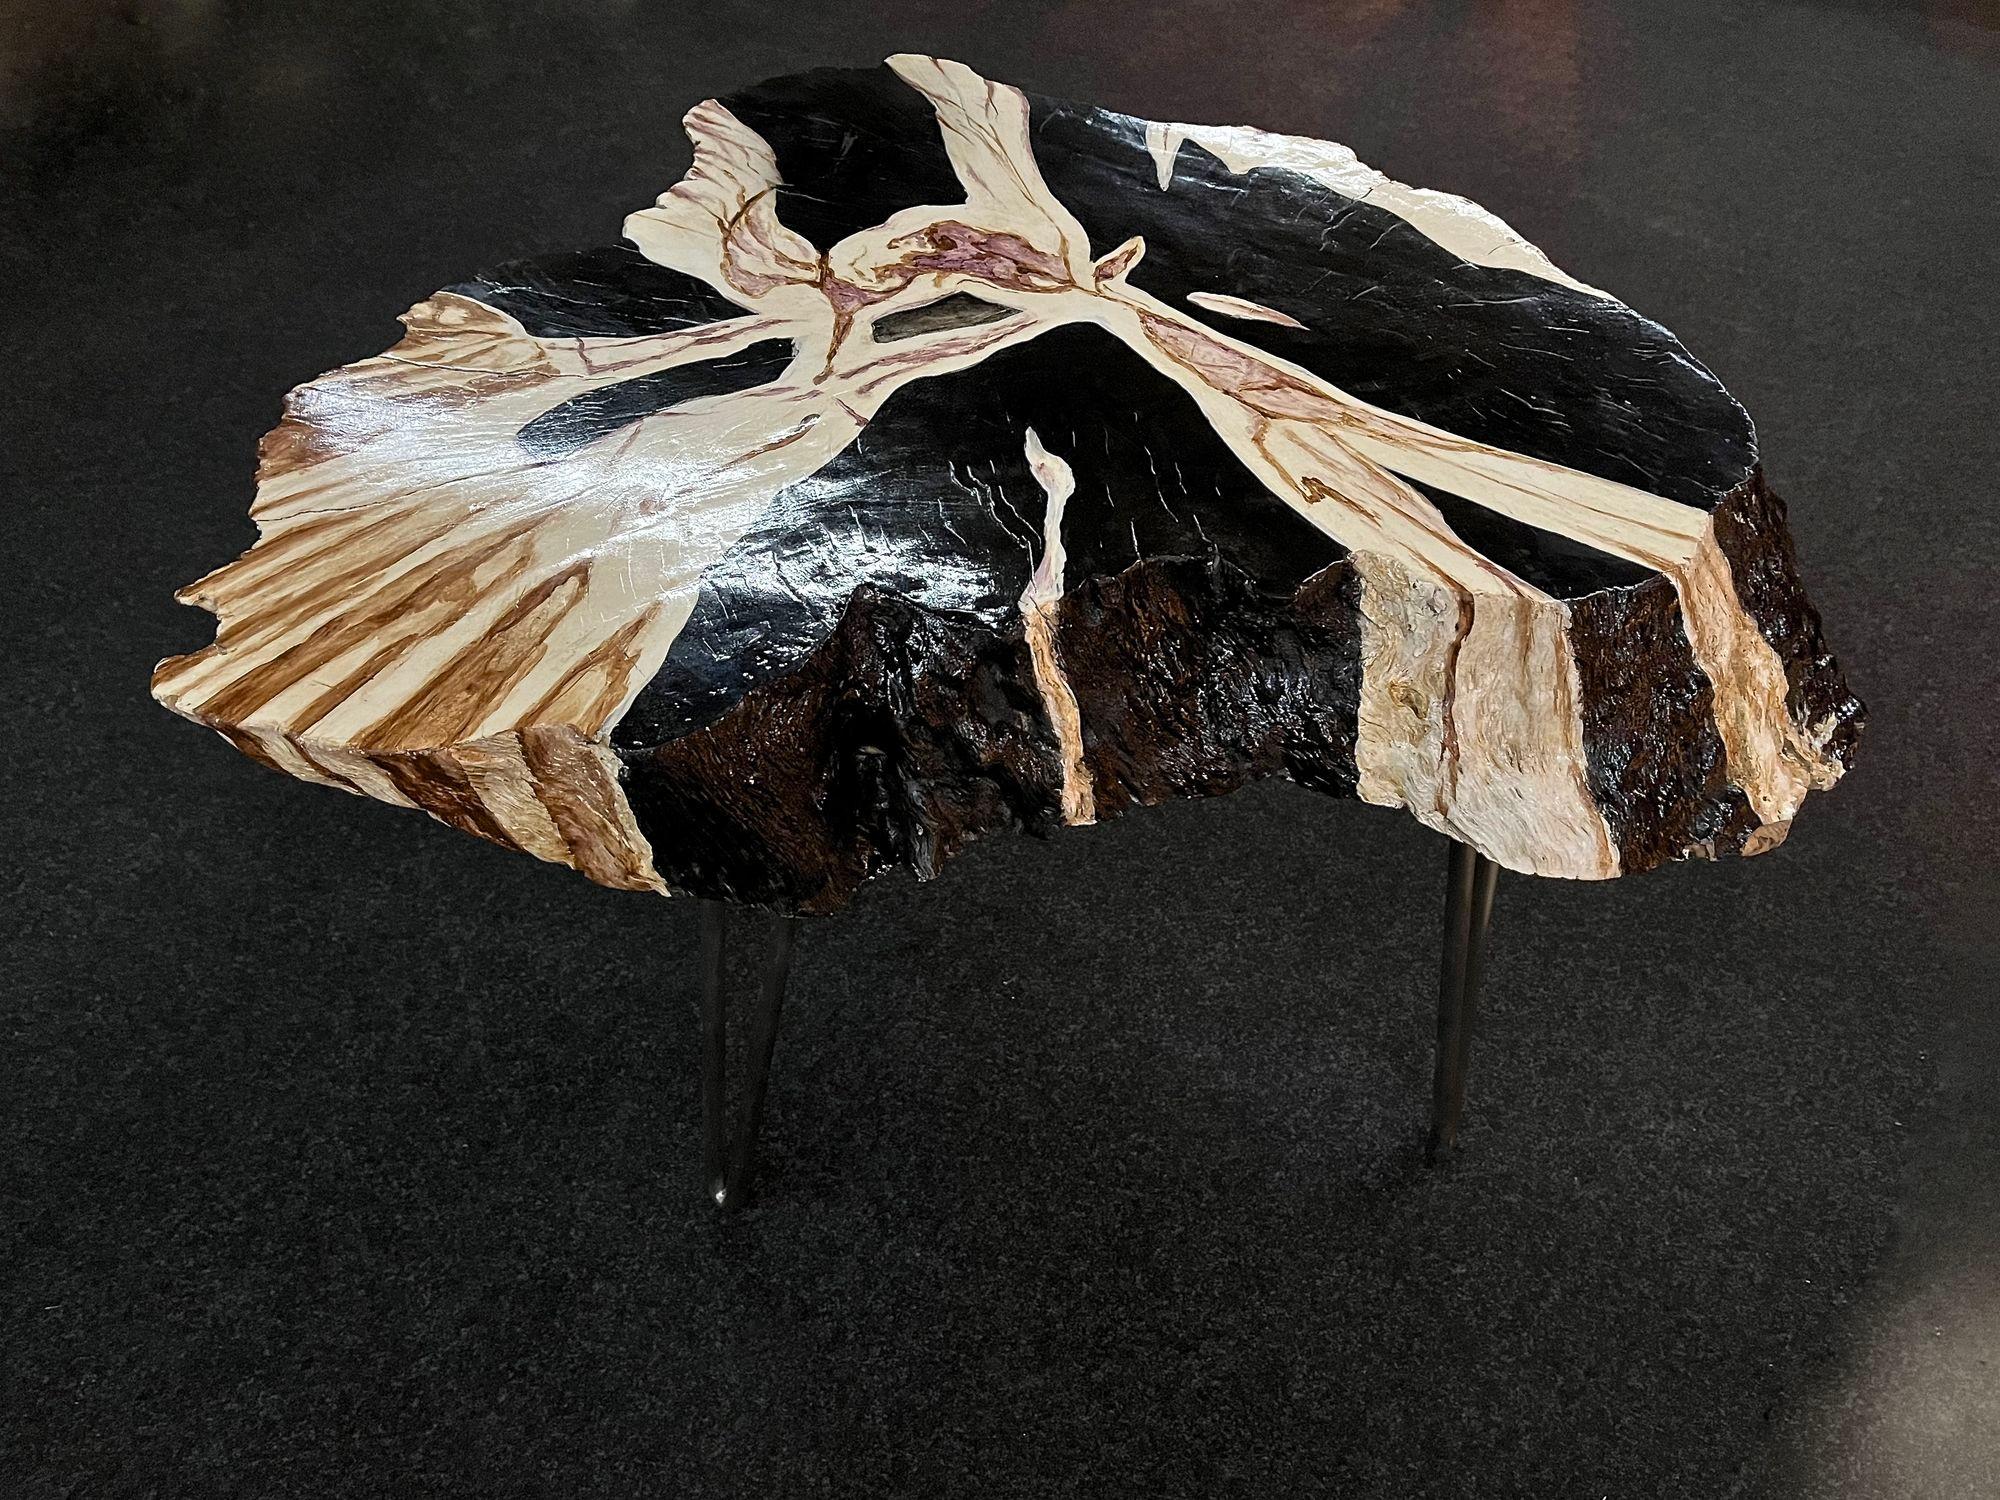 Stainless Steel Teak Root Side Table, Petrified Wood Style, Hand Painted by Artist, IDN 2023 For Sale